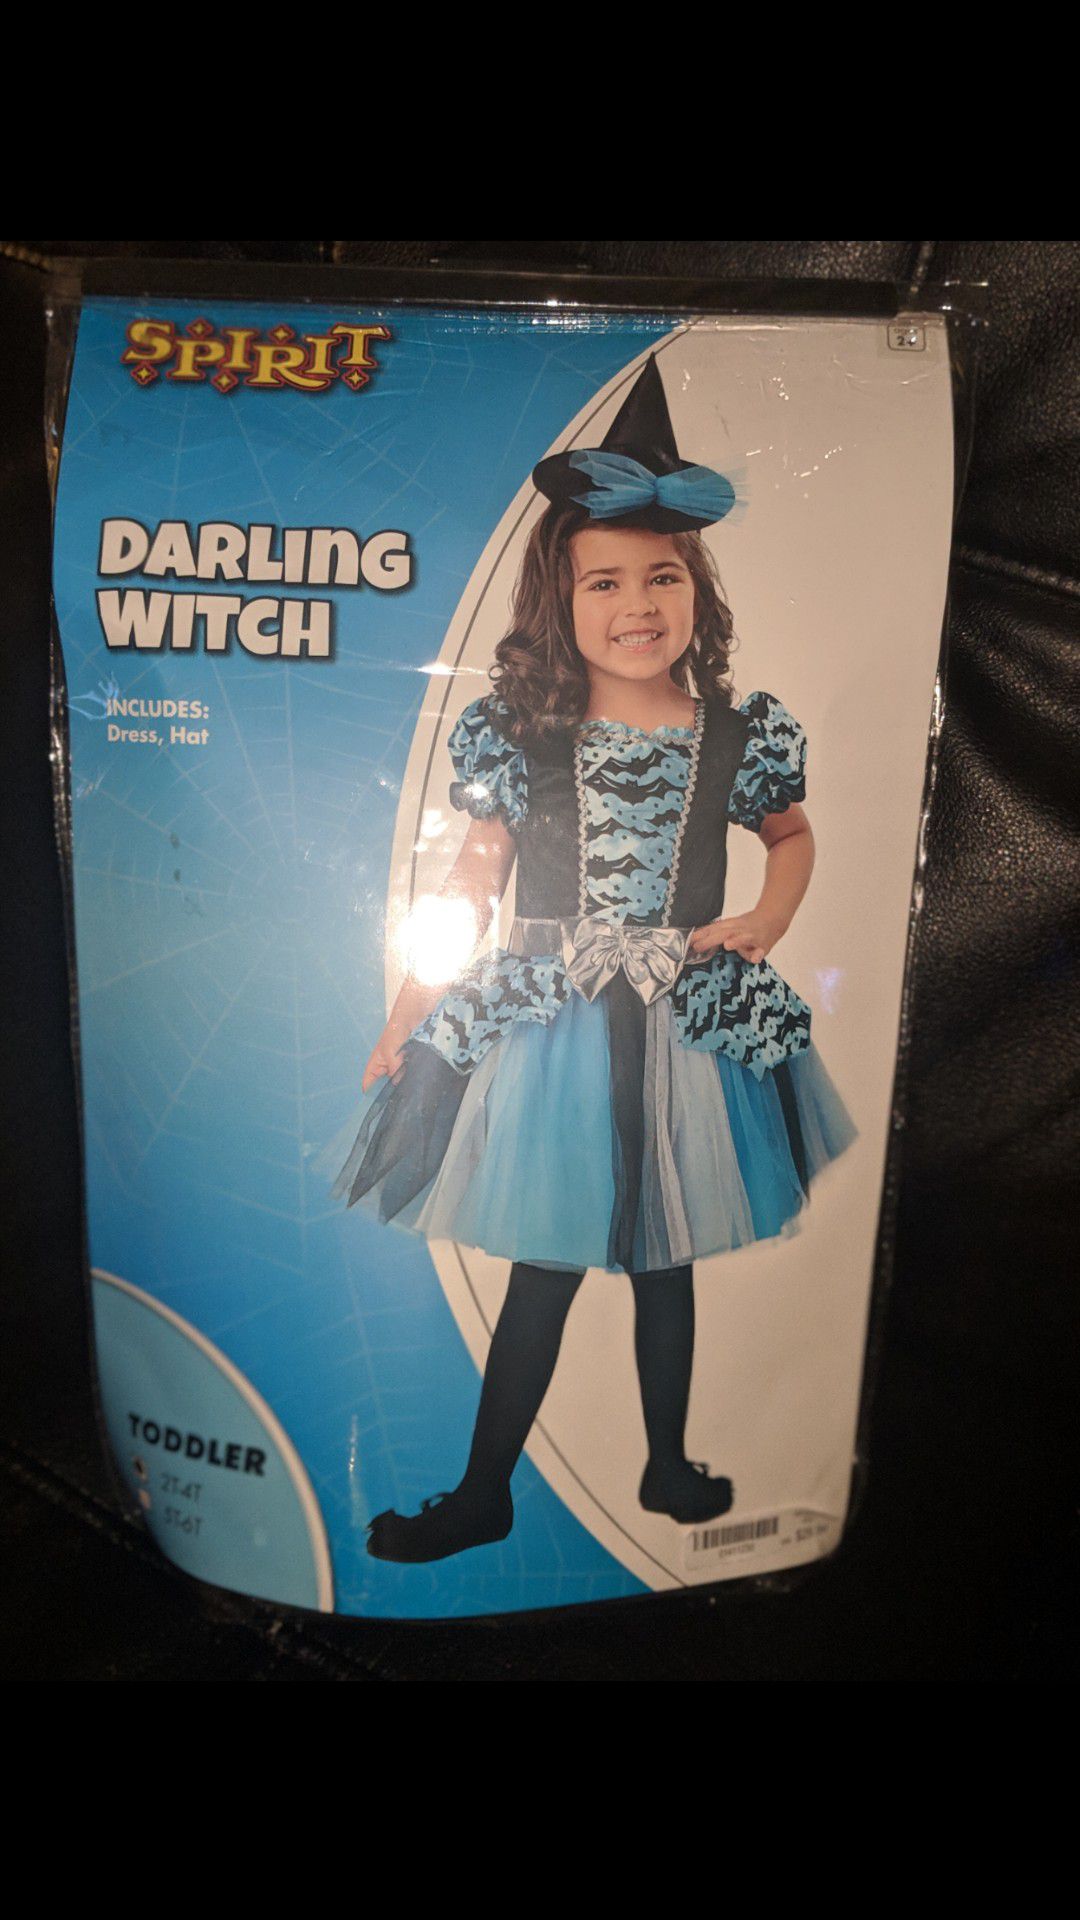 Darling Witch Costume (Toddler 2t - 4t)